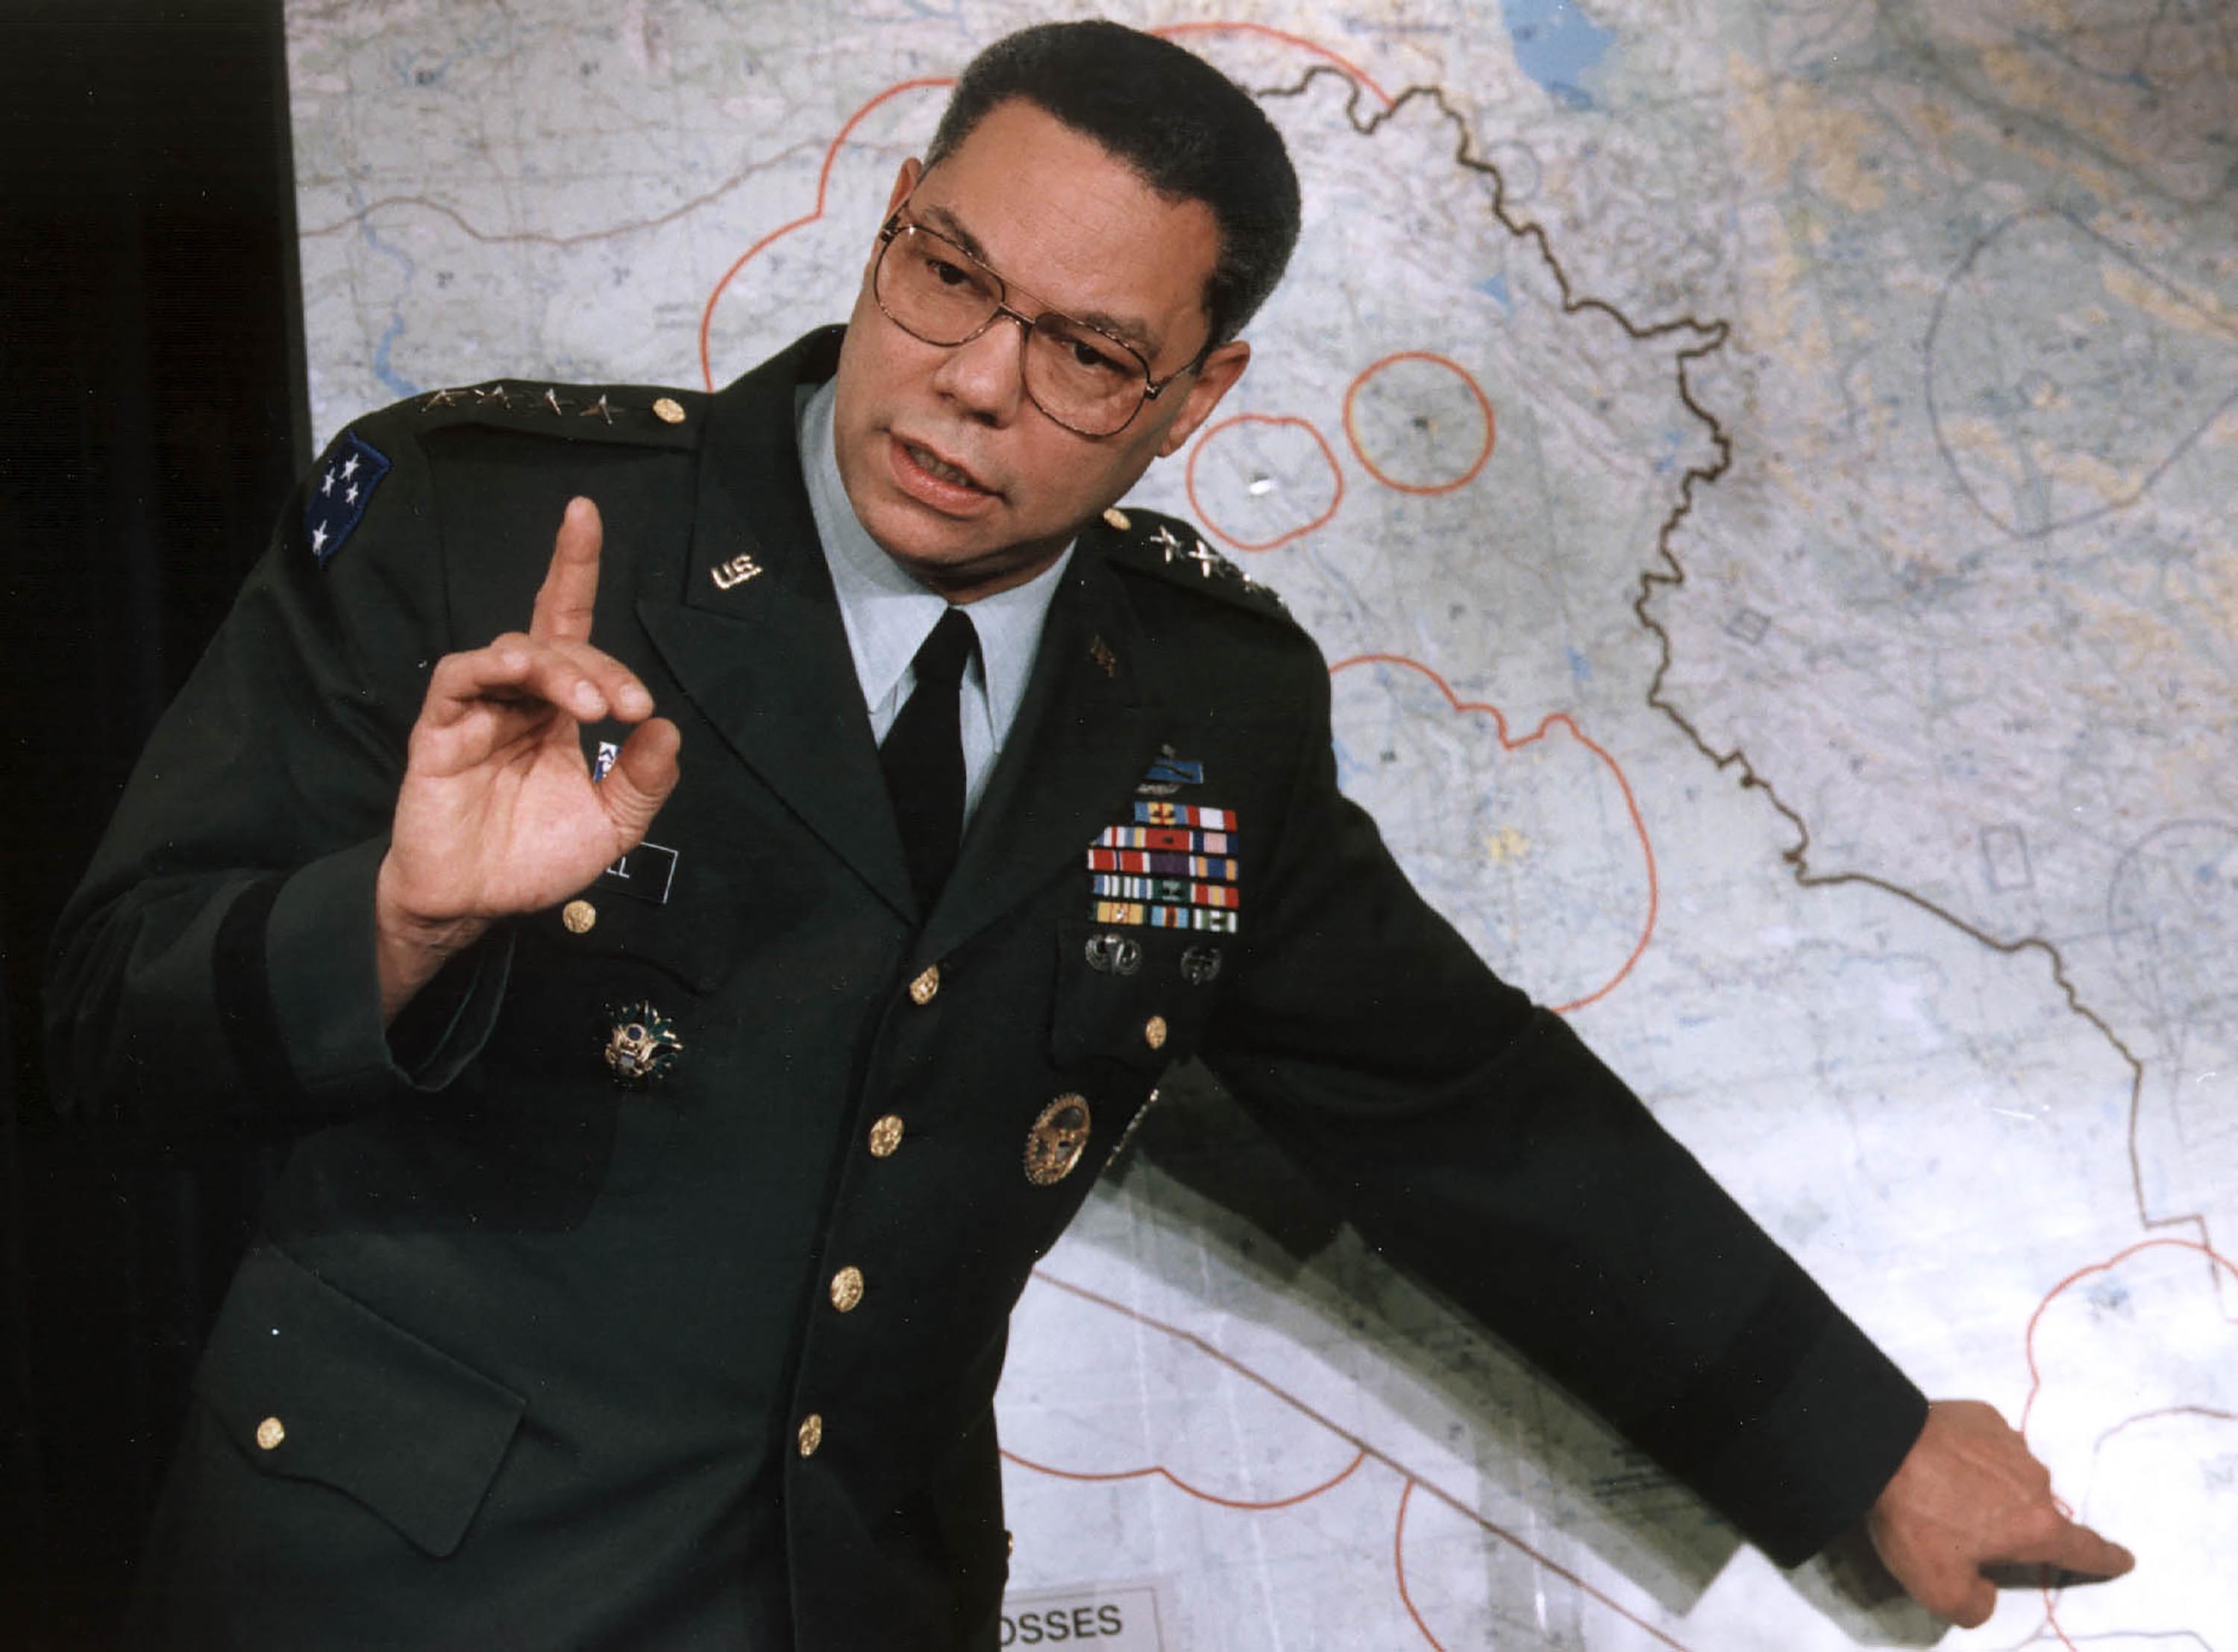 Colin Powell, chairman of the US Joint Chief of Staff, makes a point about the entrenched Iraqi troops in Kuwait during a briefing at the Pentagon in January 1991.